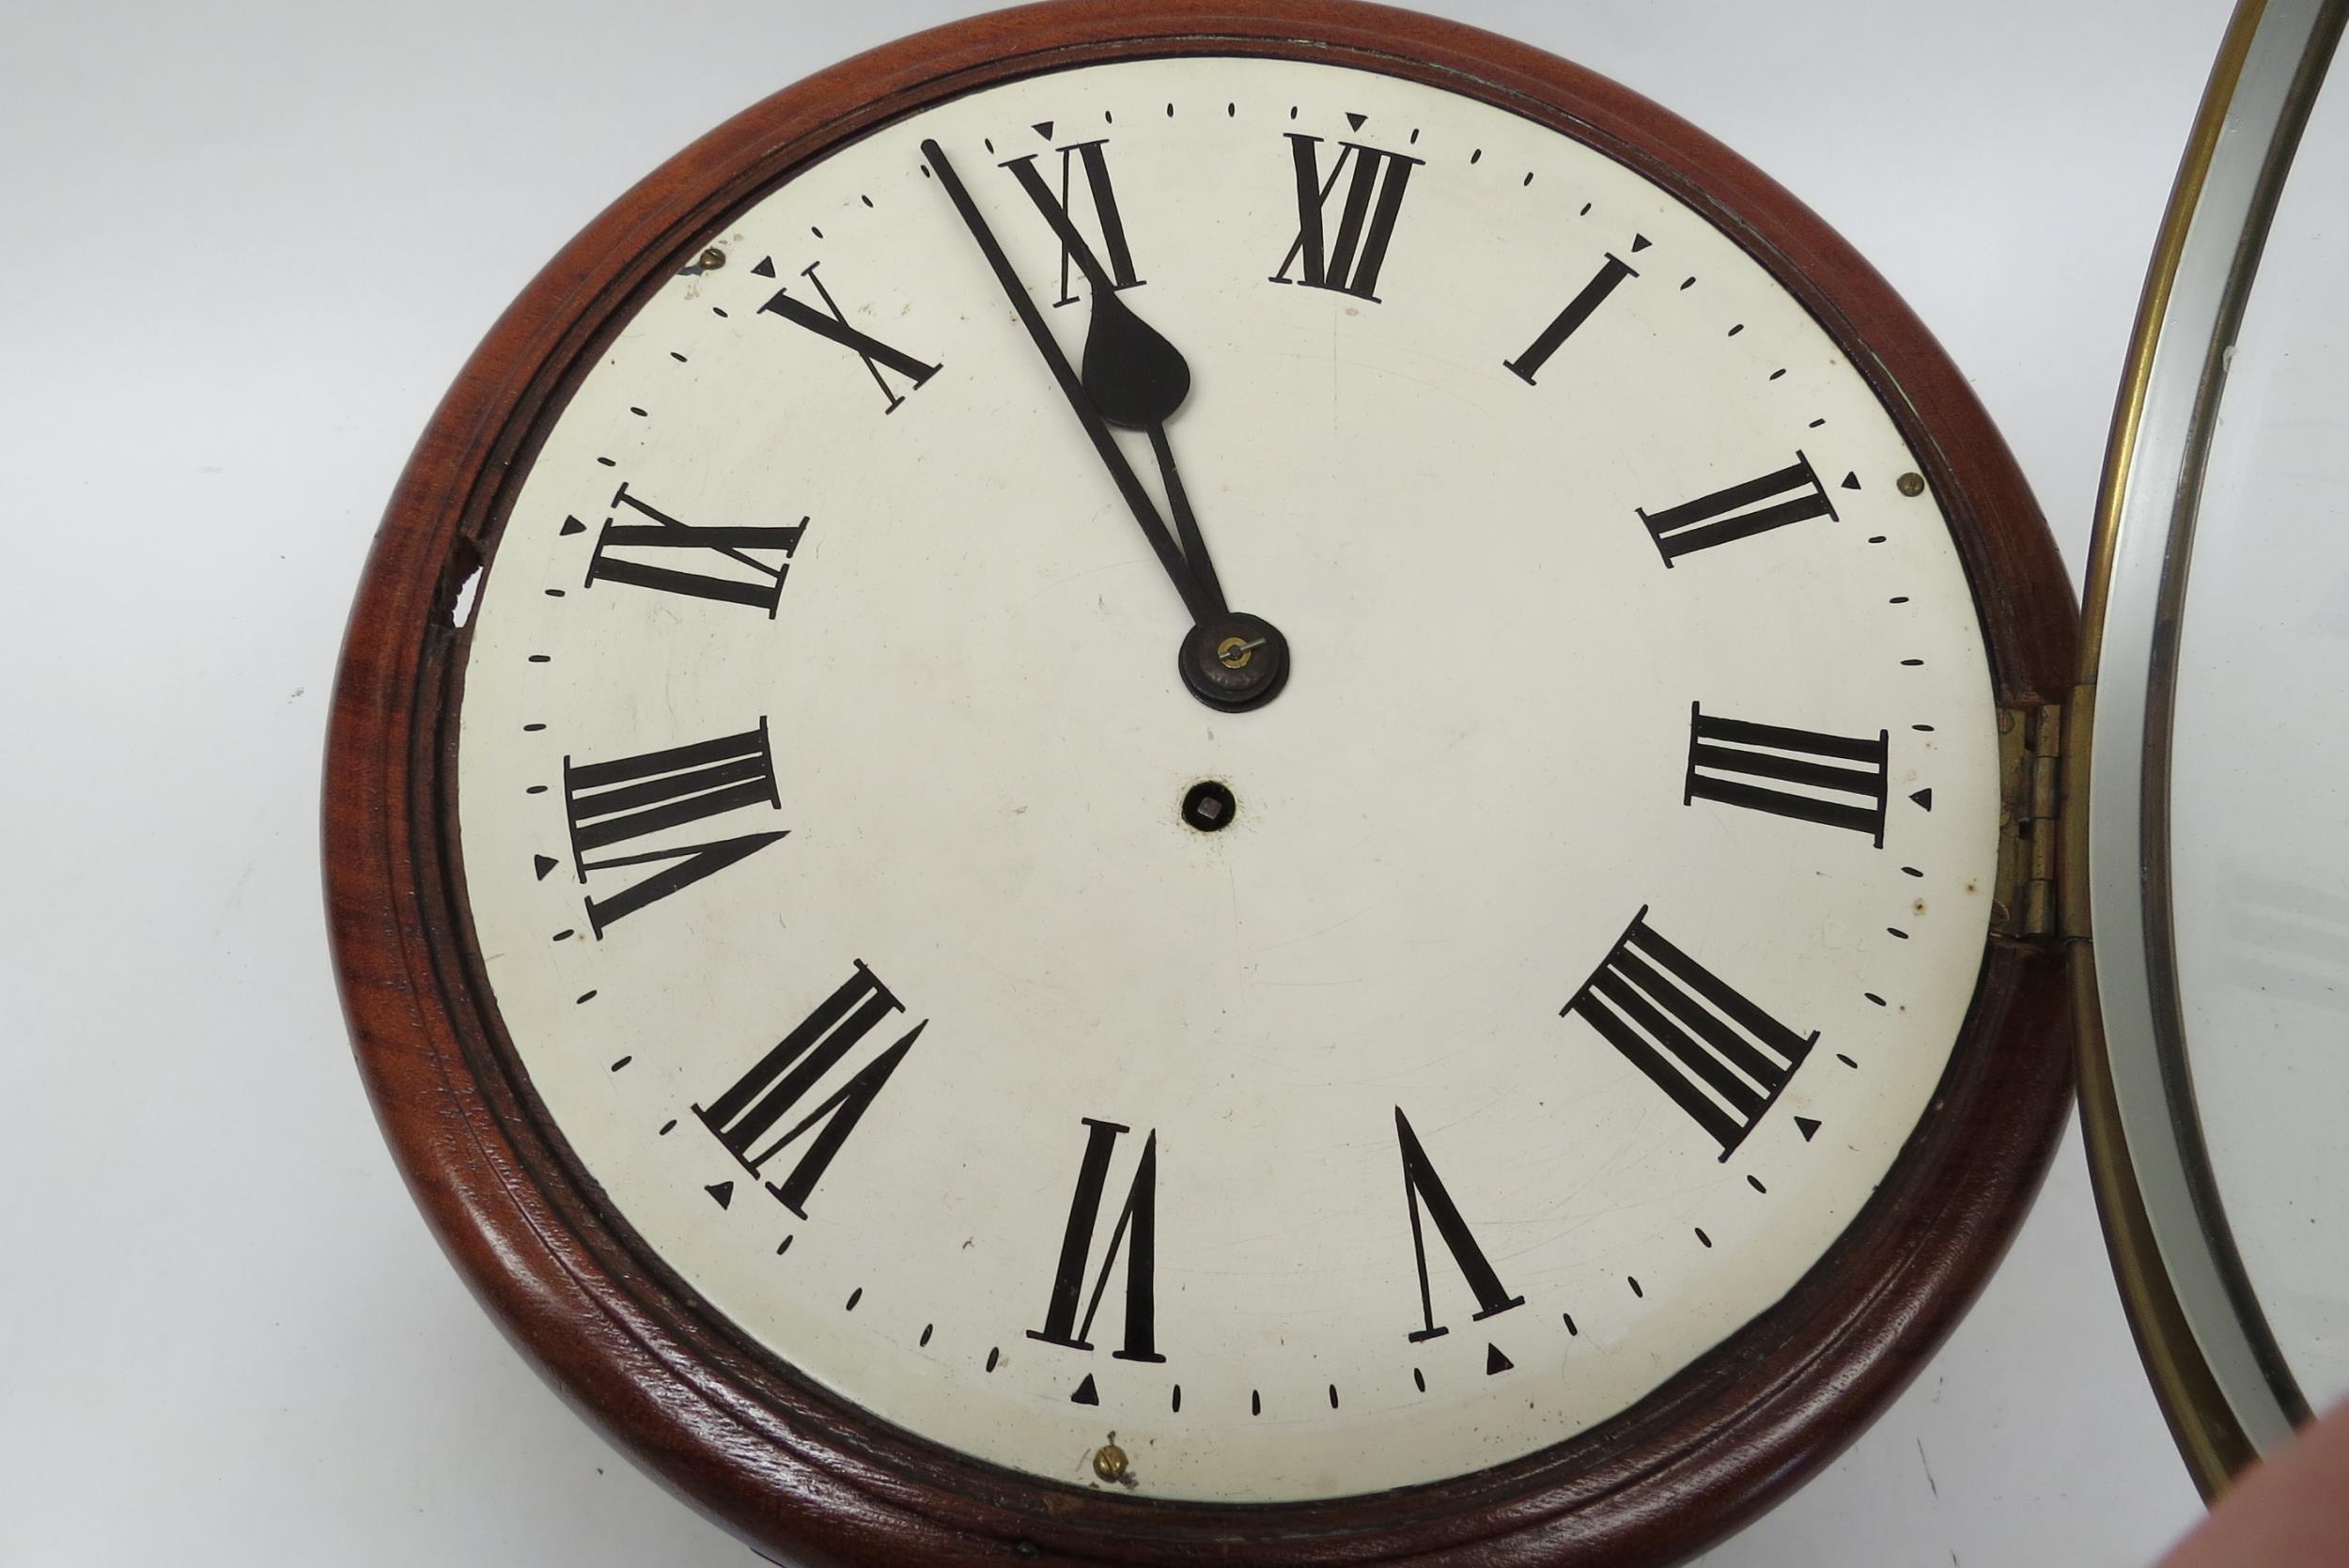 A 19th Century 11 3/4 inch dial clock with Roman numerals, single fusee mechanism, mahogany case - Image 2 of 4